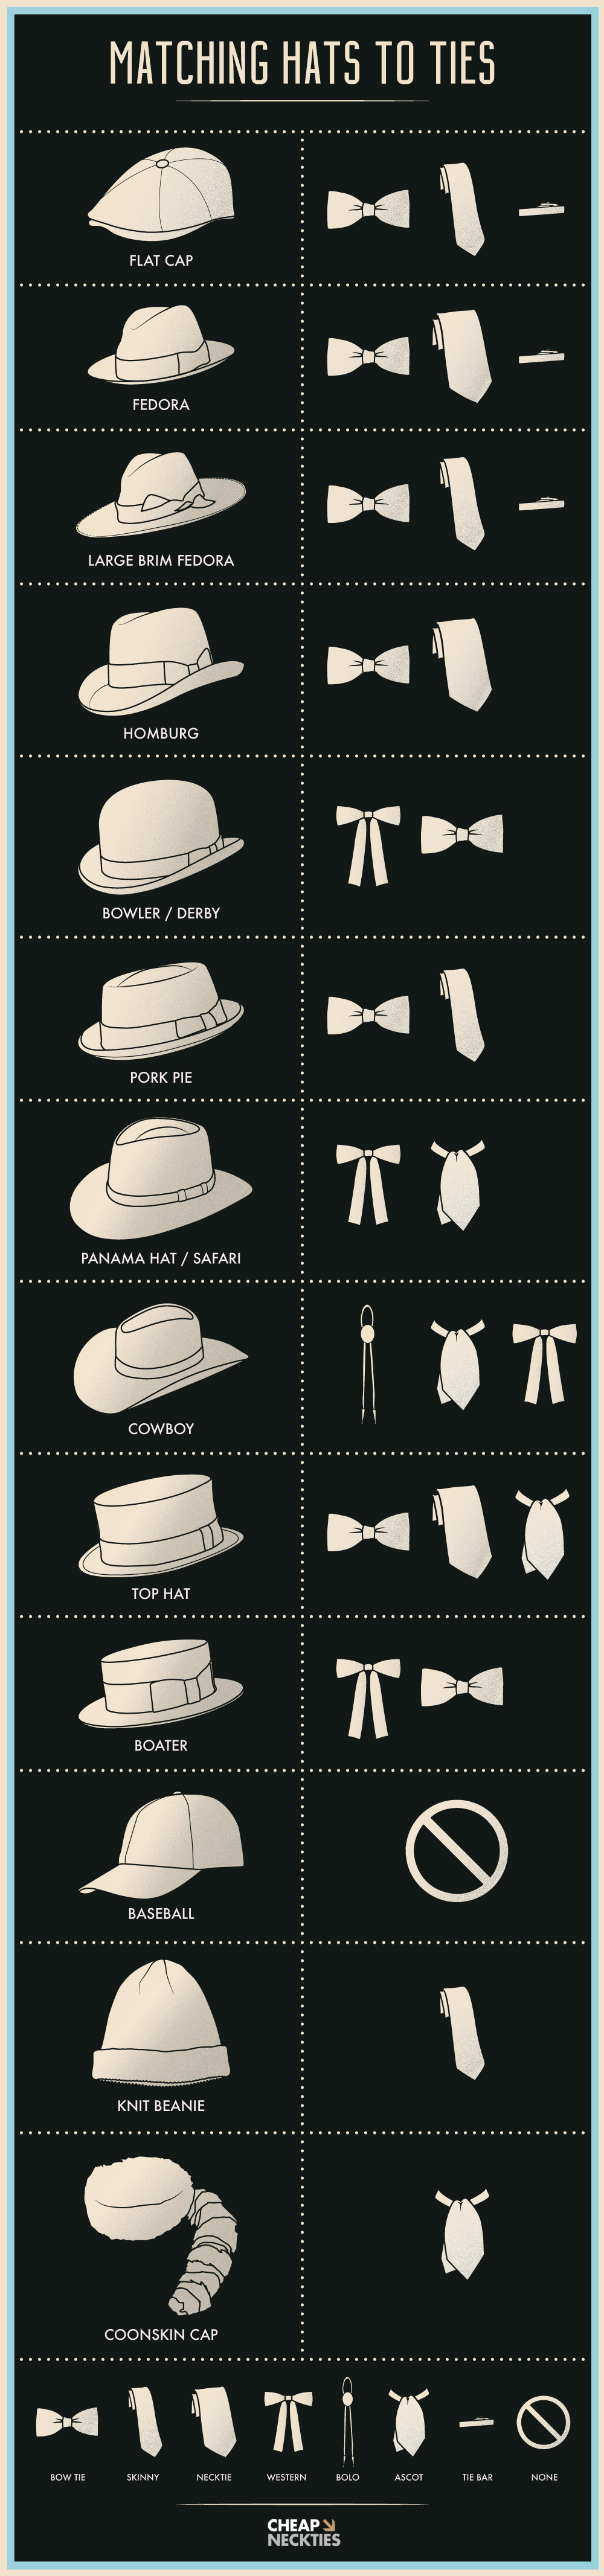 Guide for Matching Hats to Ties For Men